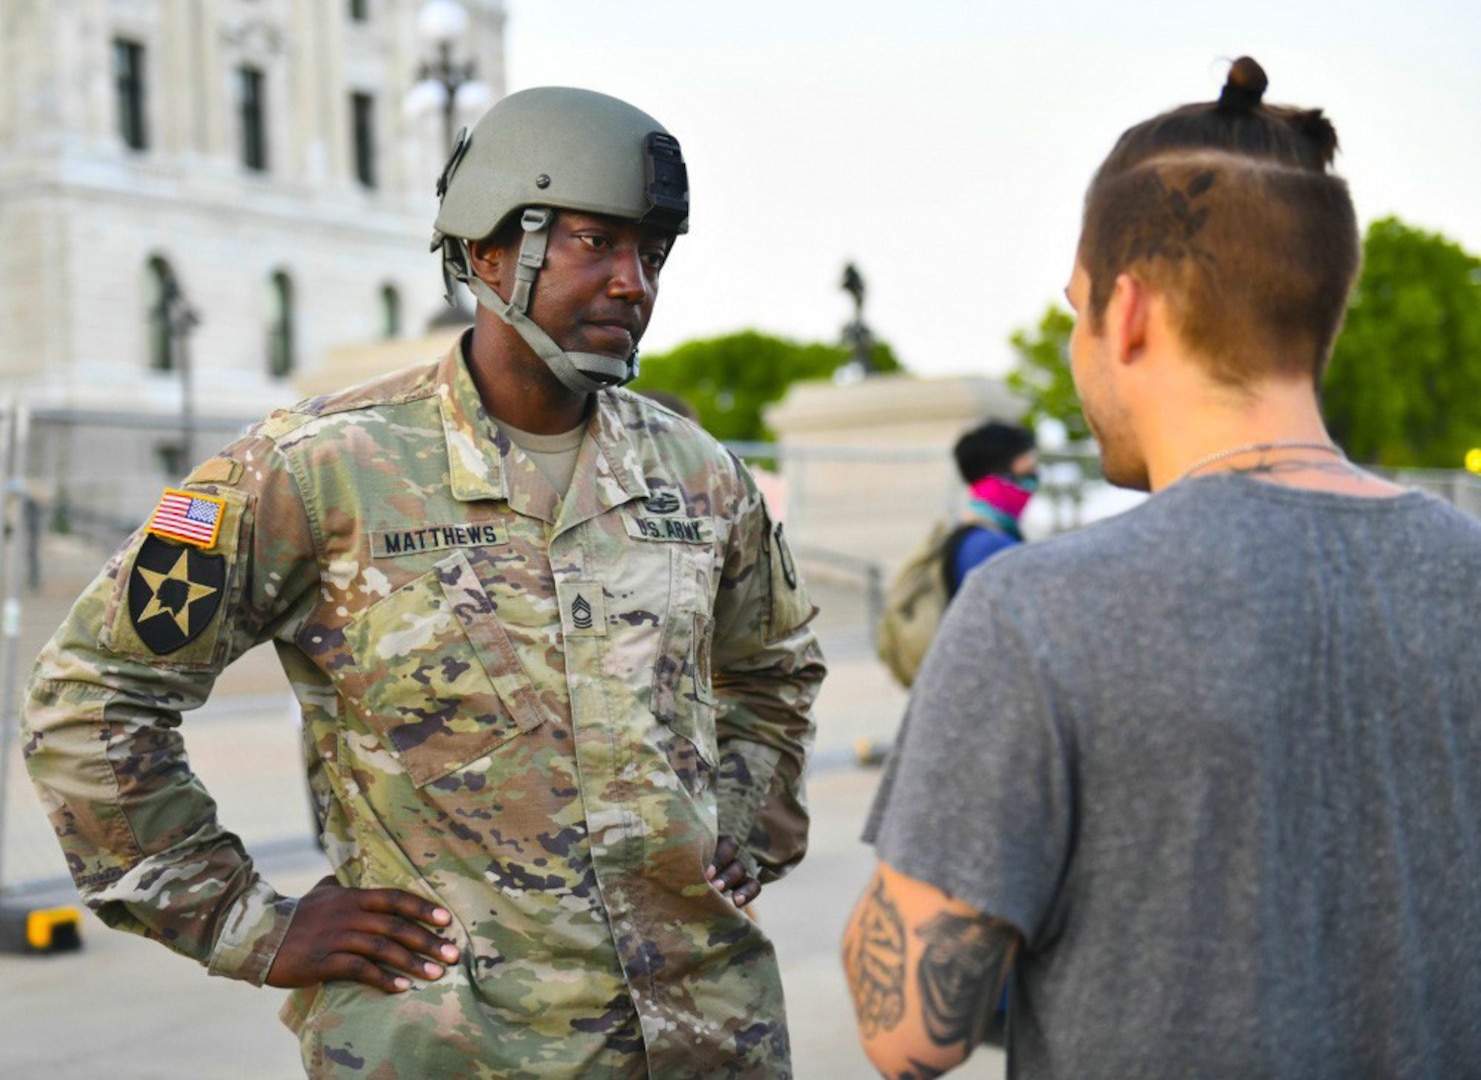 Minnesota Guard Soldier eases tensions with protesters > National Guard